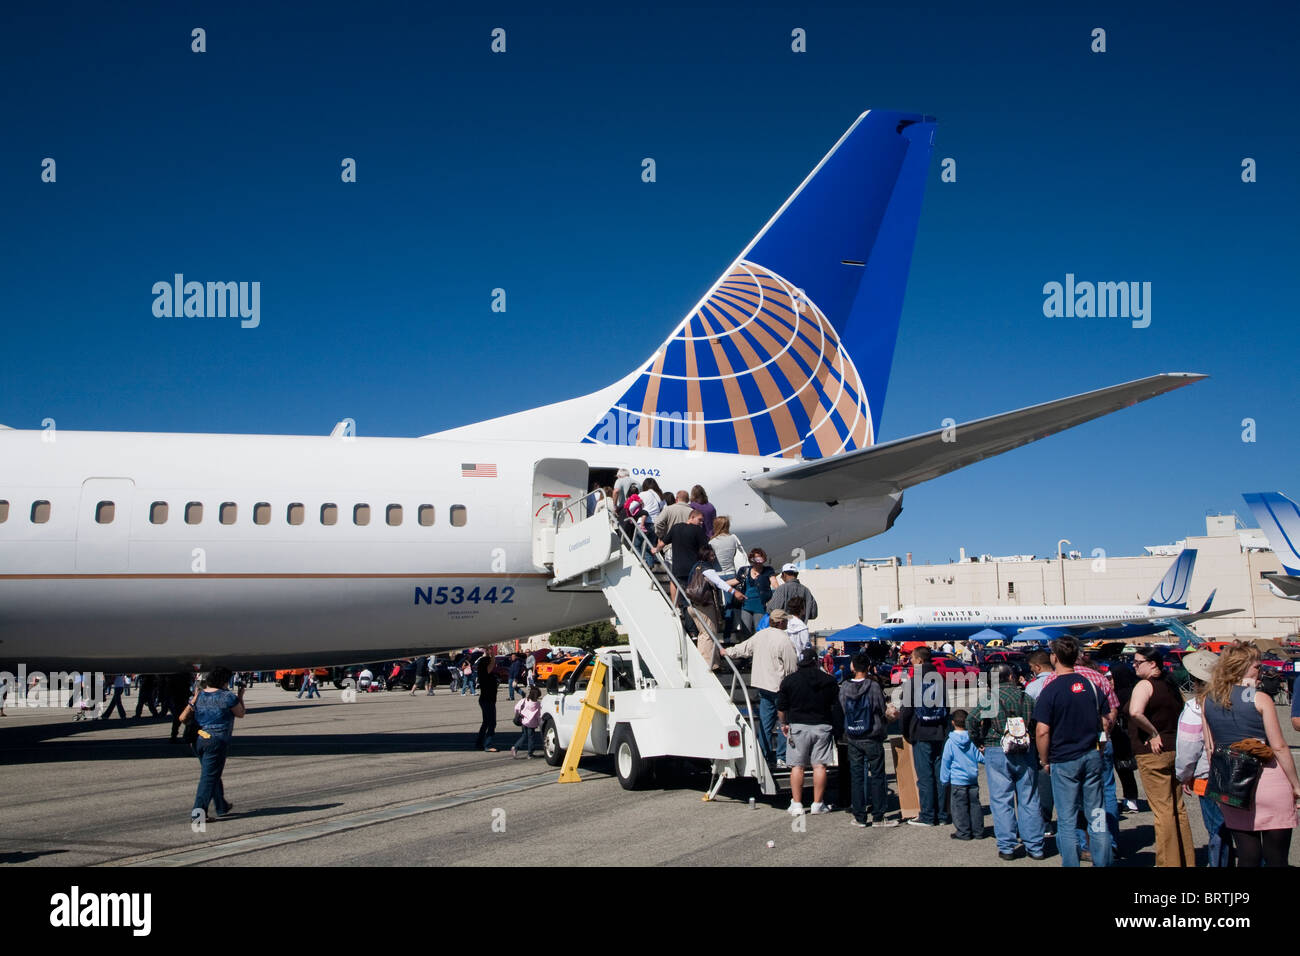 United Continental new airline company logo on airplane, with old United branded plane in background, October 10, 2010. Stock Photo